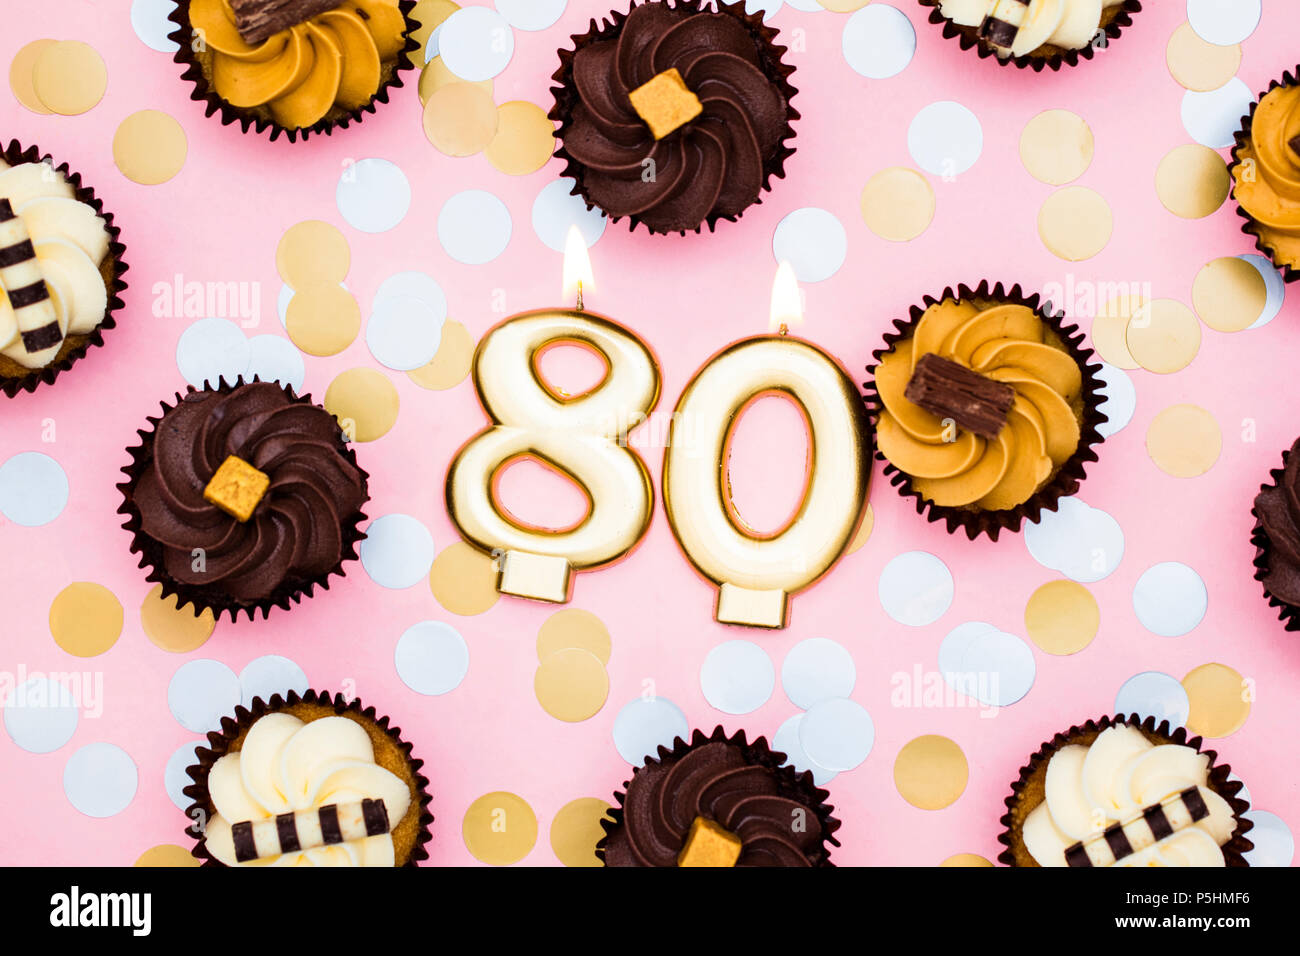 Number 80 gold candle with cupcakes against a pastel pink background Stock Photo